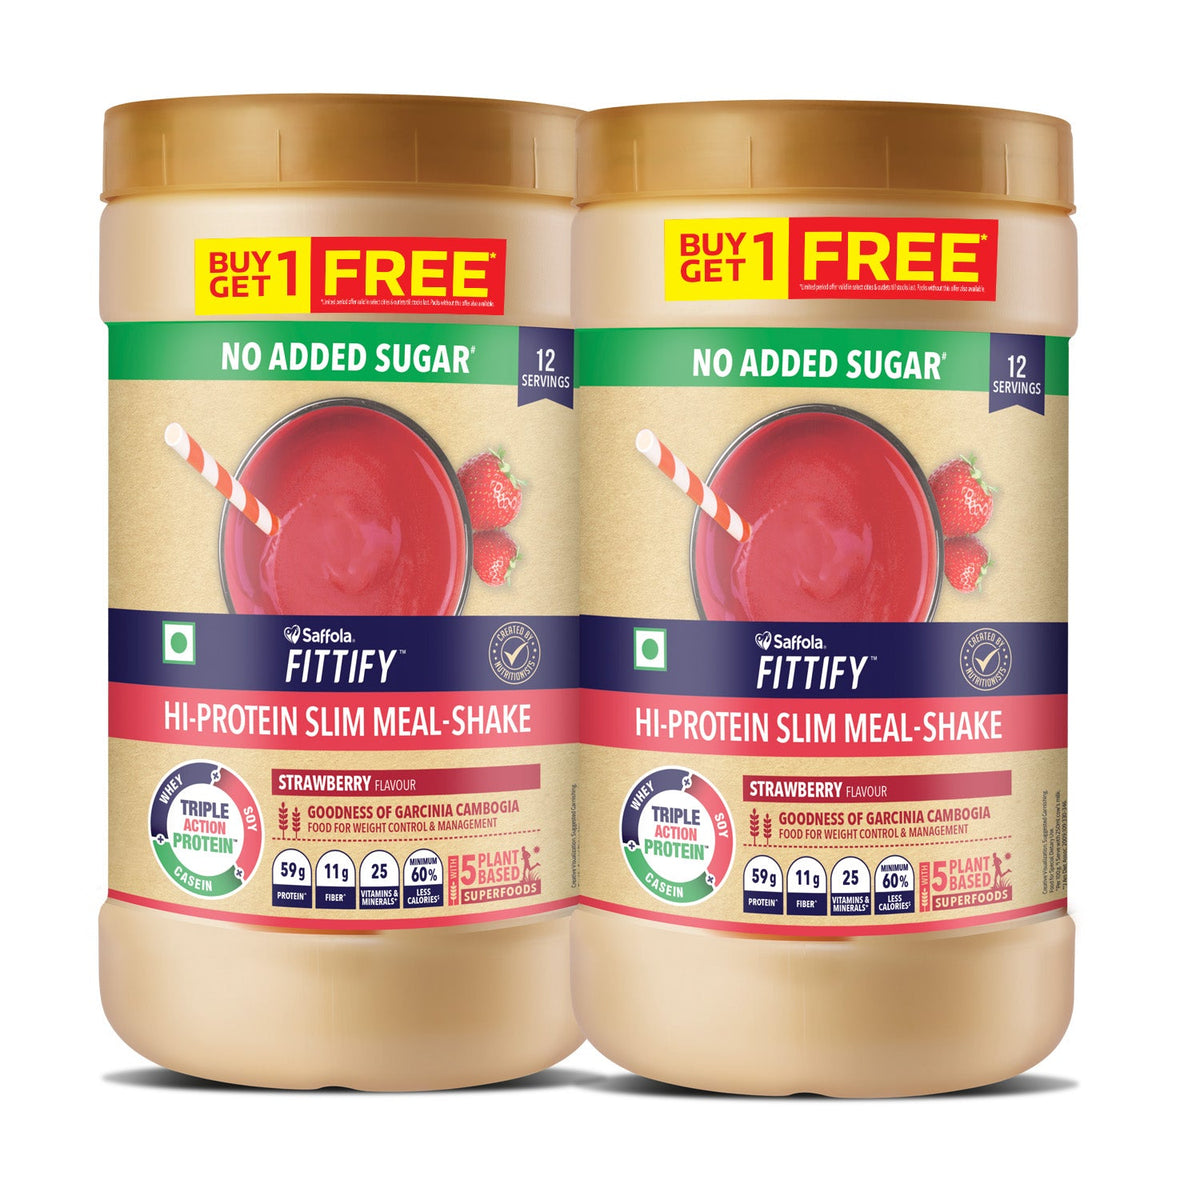 [CRED] Hi Protein Slim Meal-Shake Strawberry No Added Sugar Buy 1 Get 1 Free 420 Gms (12 Servings)